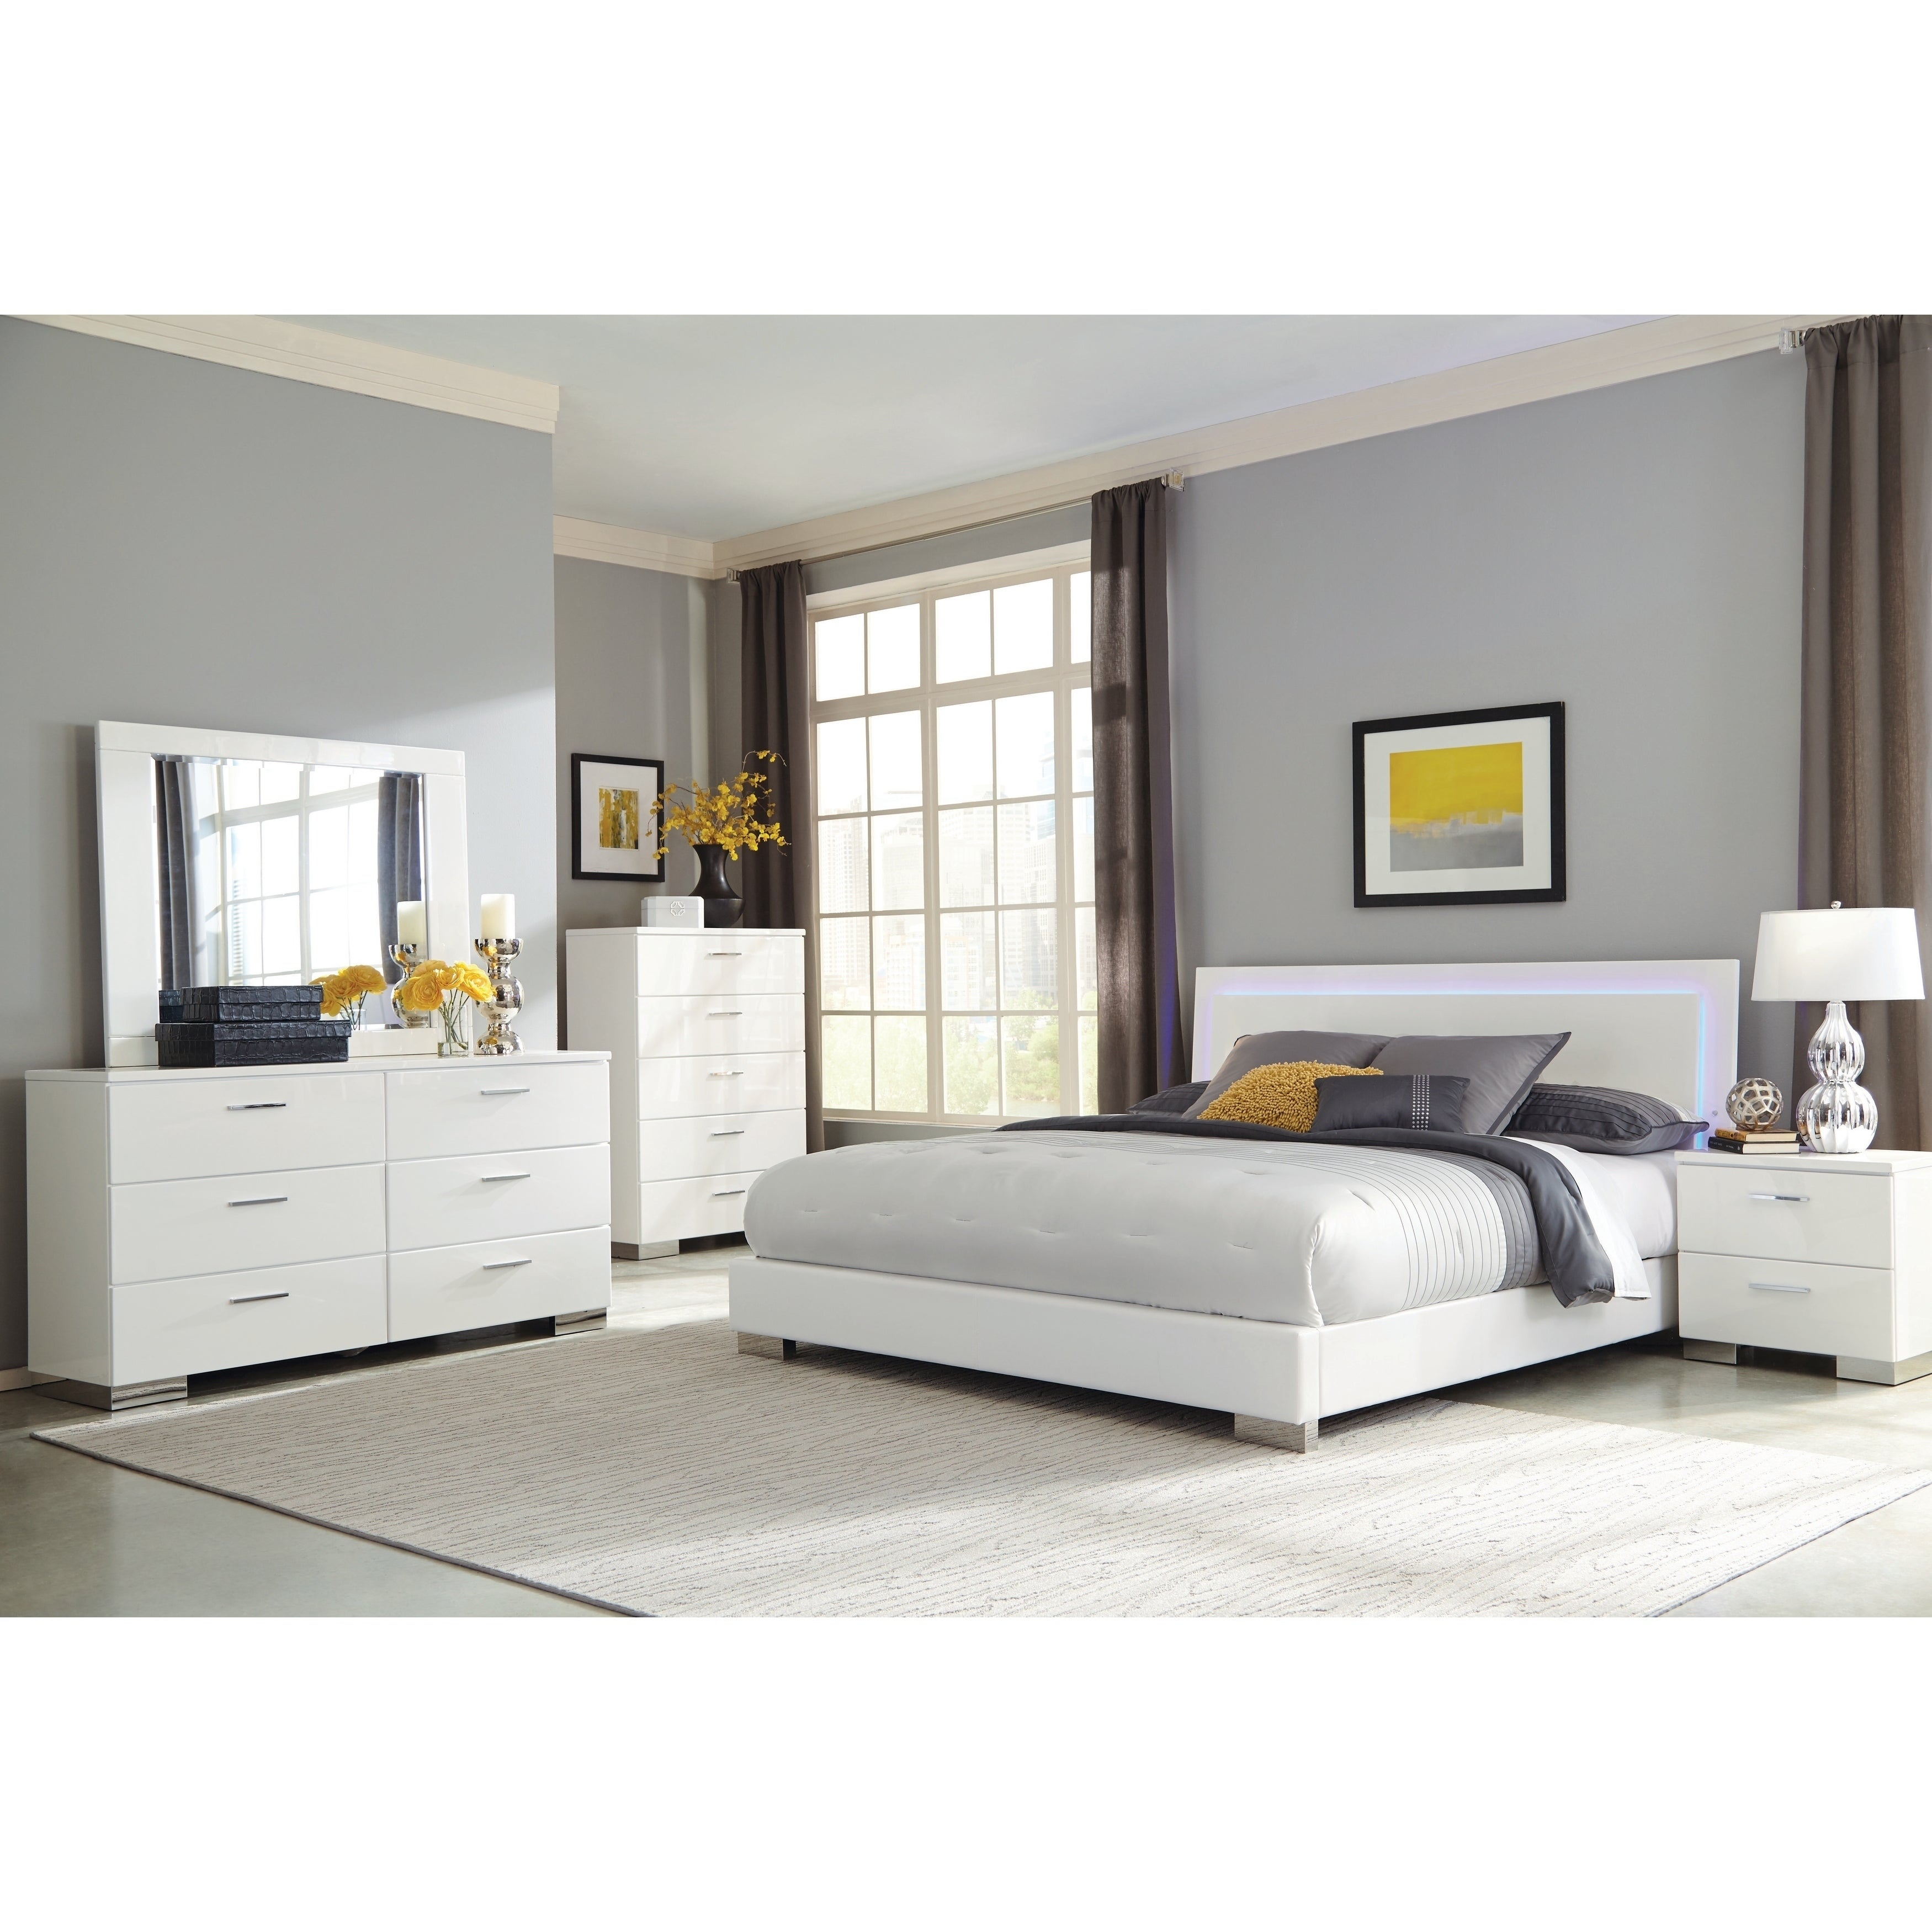 Strick Bolton Alice White 4 Piece Bedroom Set With Led Headboard with measurements 3500 X 3500